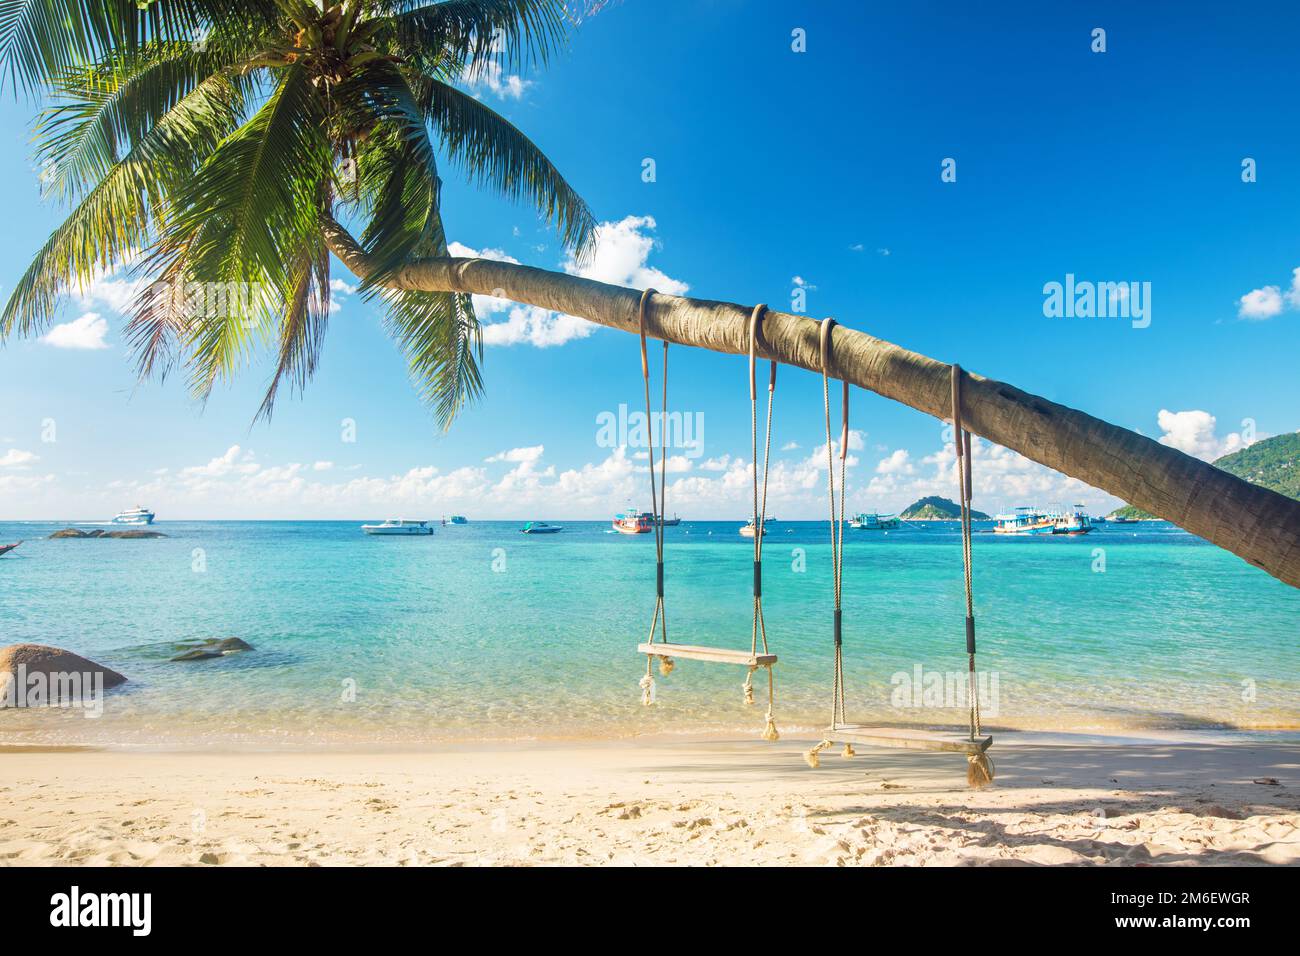 Beautiful tropical island beach with coconut palm trees and two swings Stock Photo